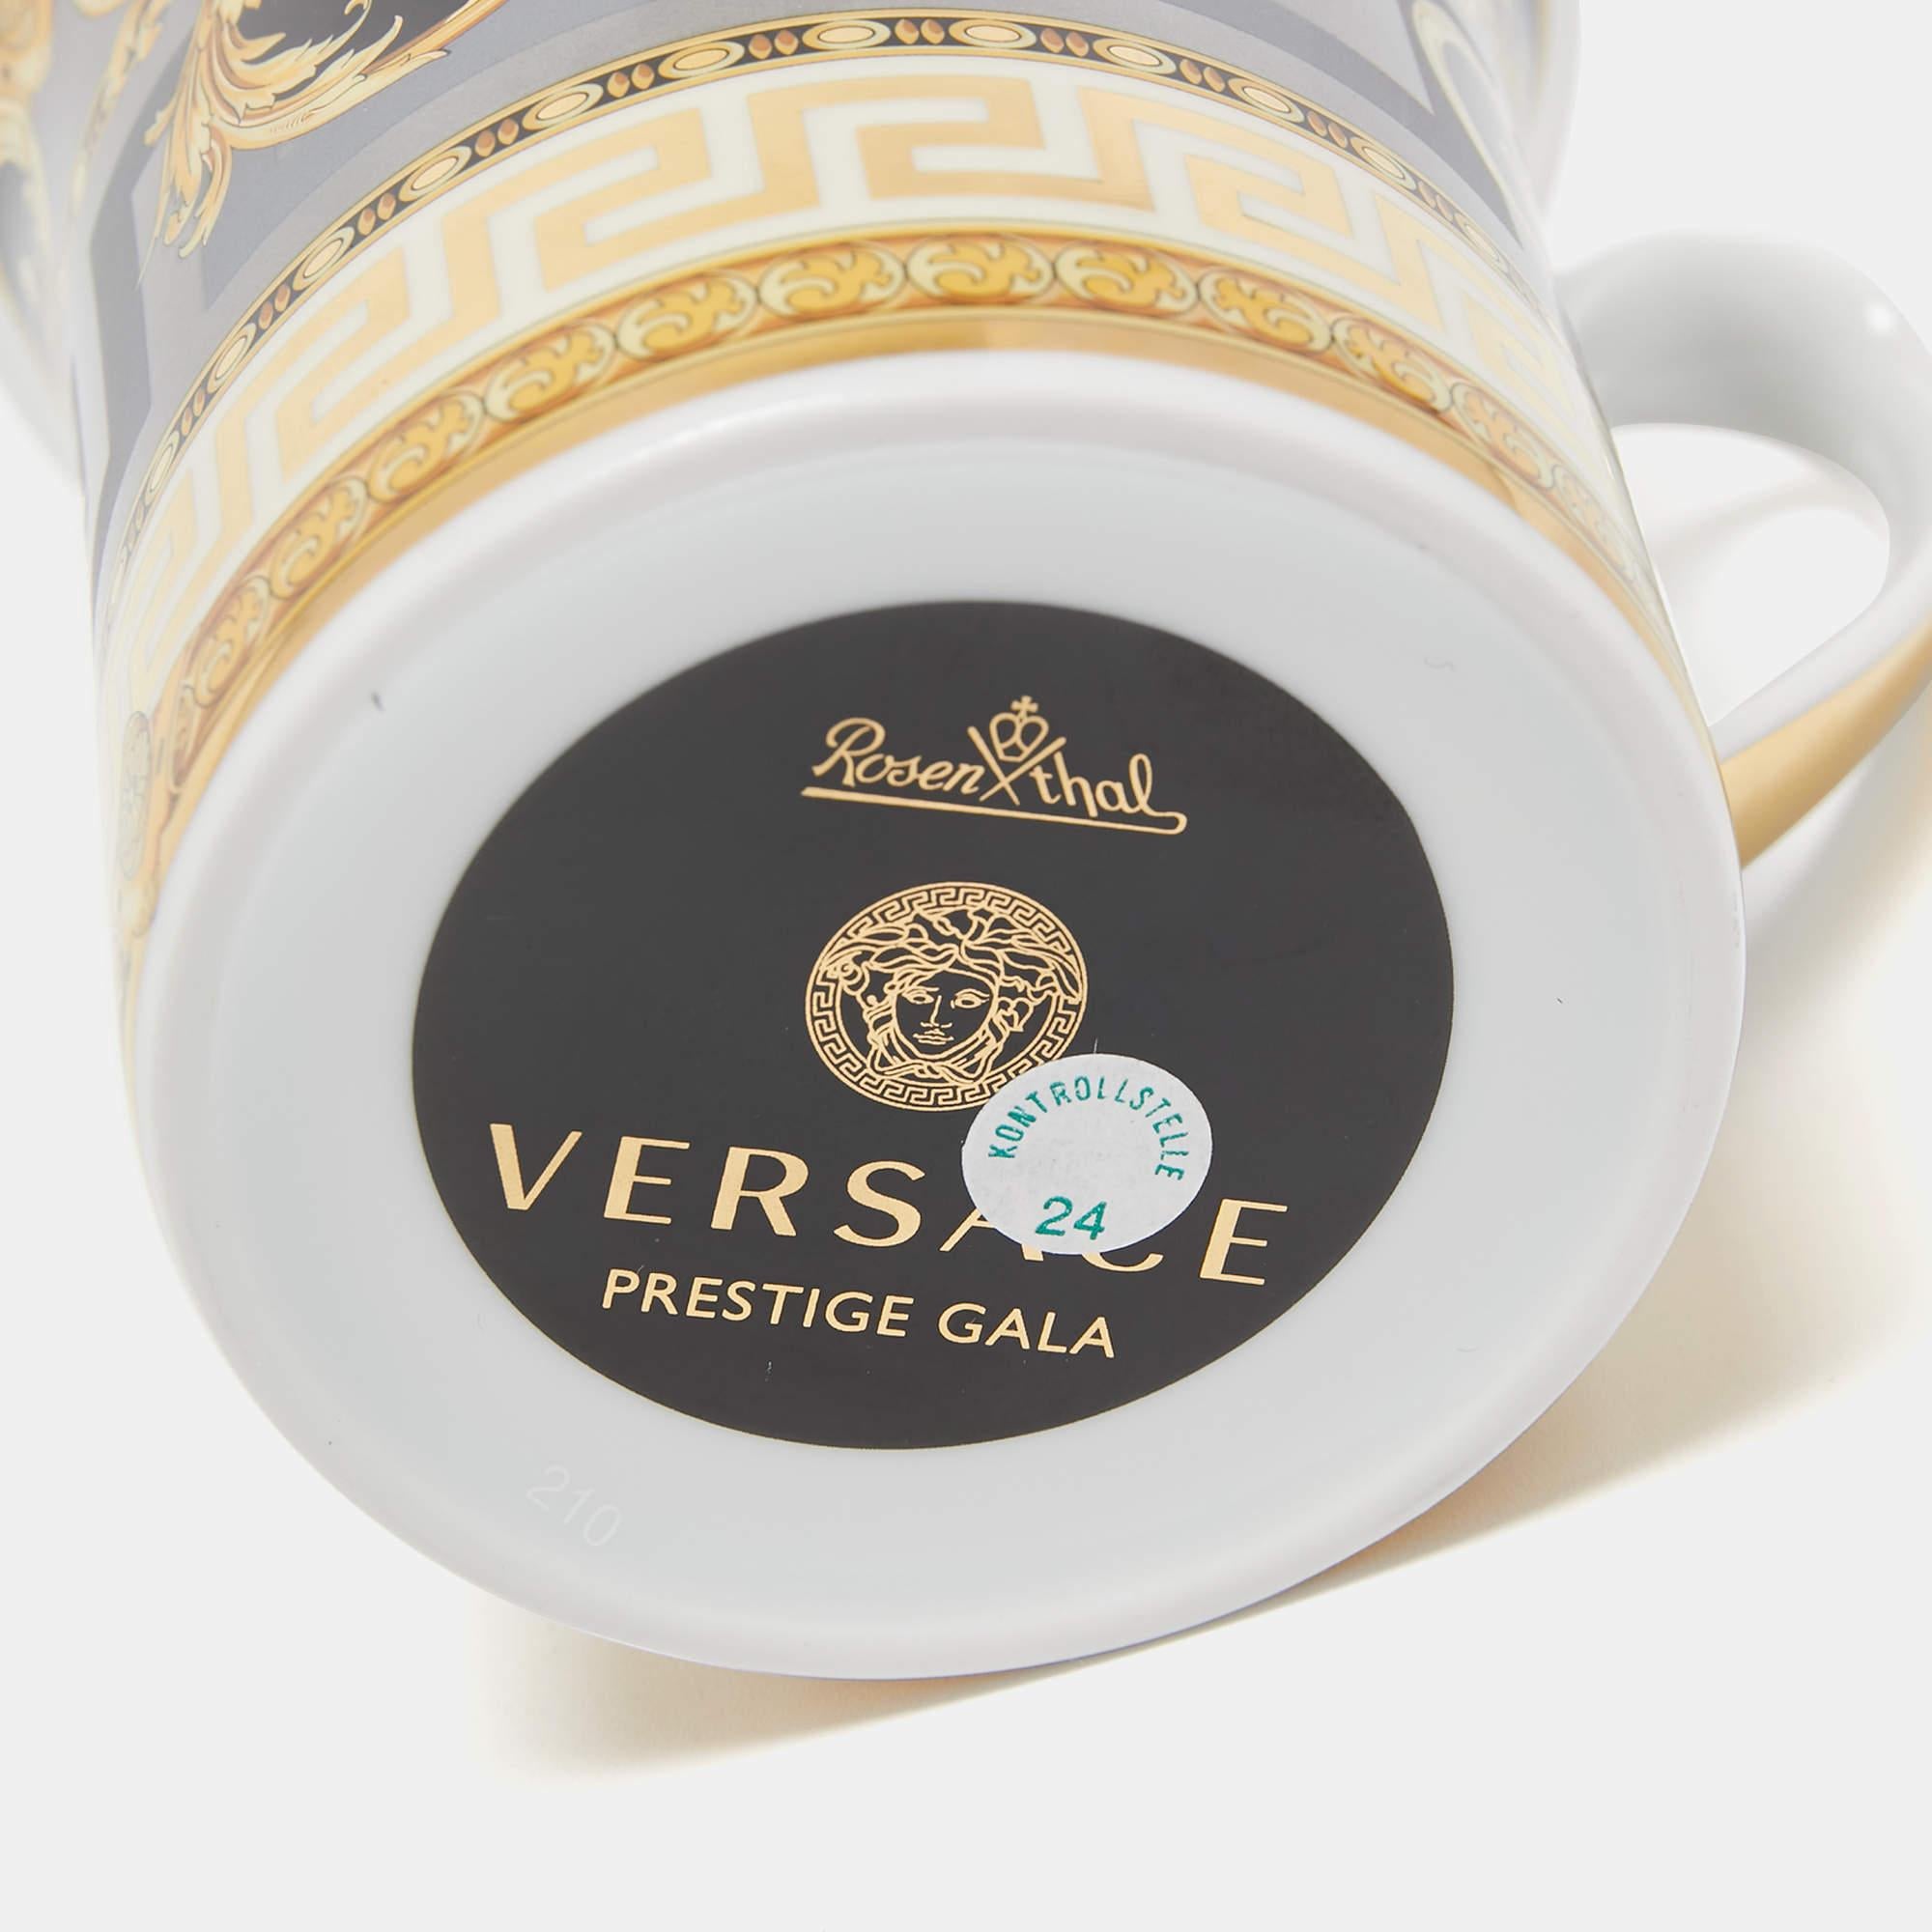 This mug is from the Rosenthal x Versace collection. Crafted delicately using high-quality porcelain, the mug has intricate details that have been subtly added to project the most elegant appeal.

Includes: Original Box